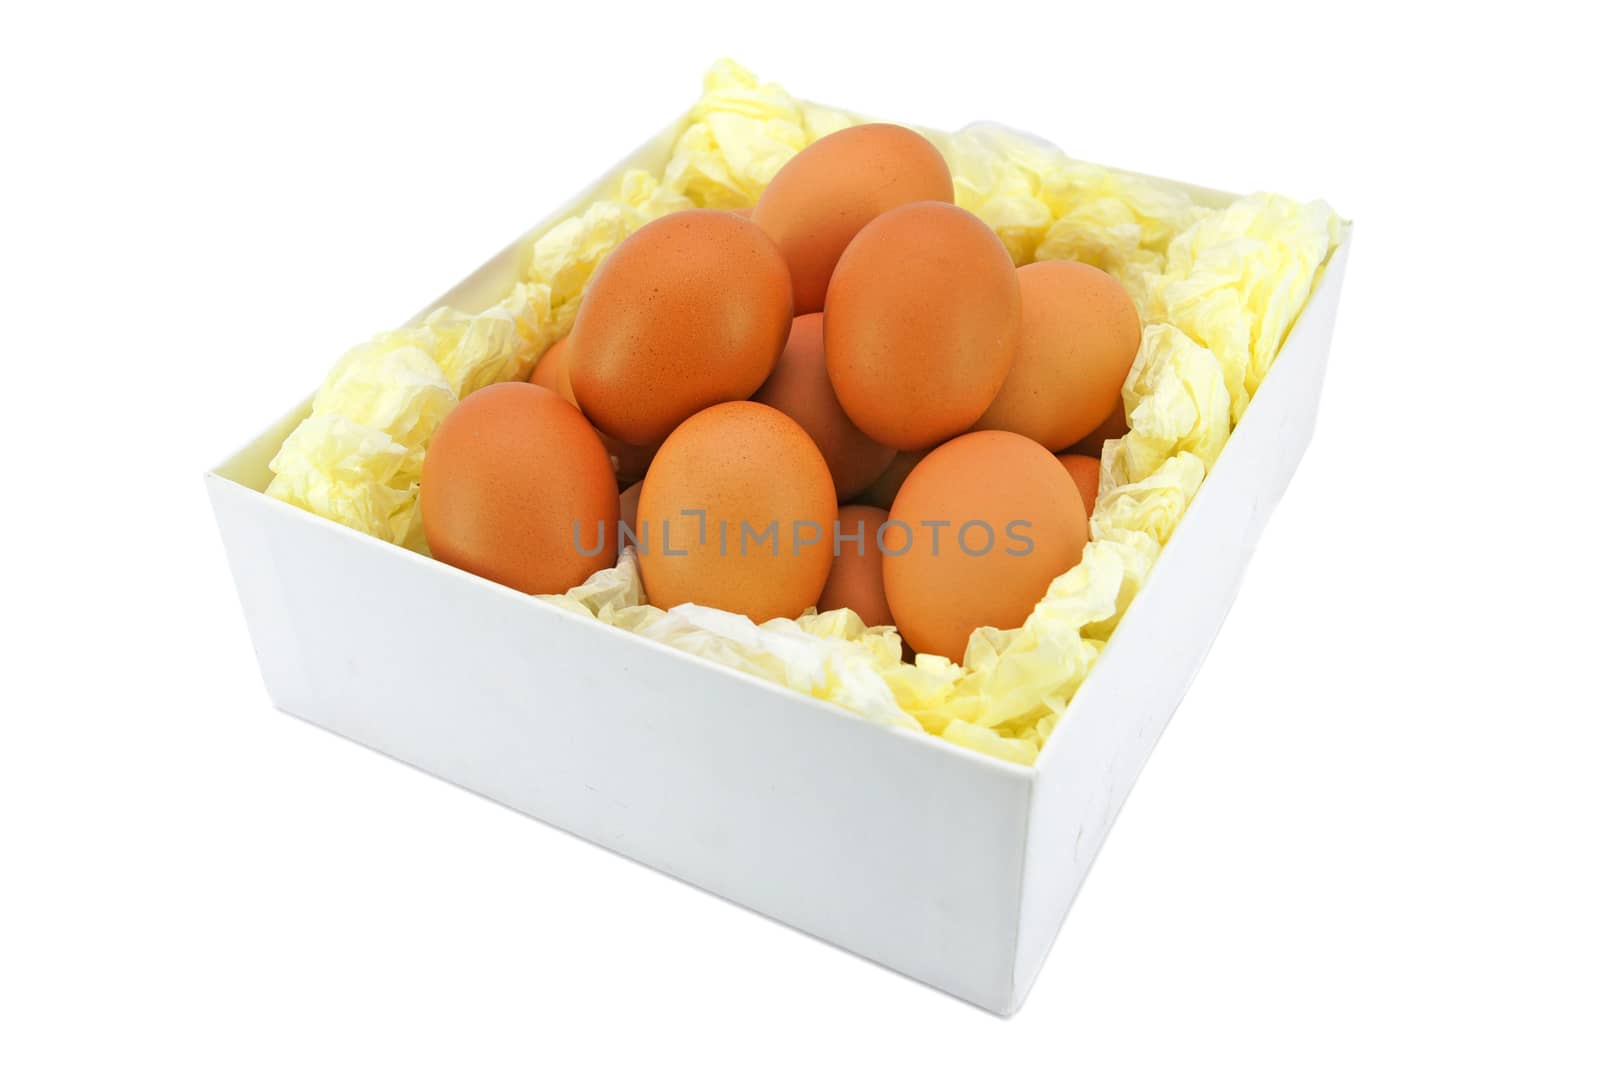 Eggs from chicken farm in the package by mranucha